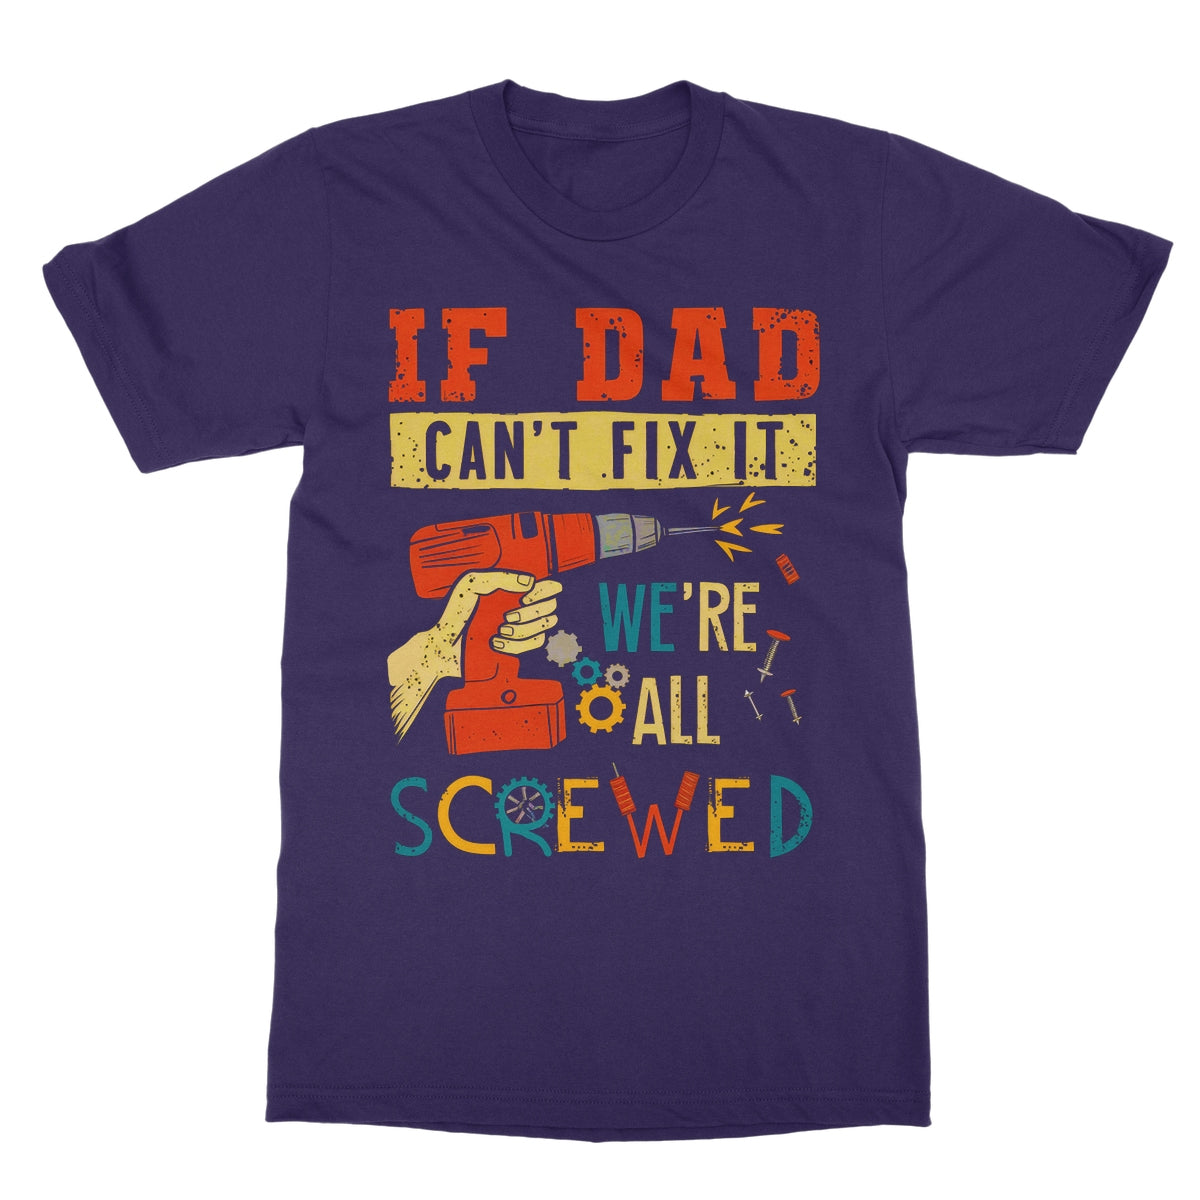 If Dad Csm't Fit It We Are All Screwed Softstyle T-Shirt